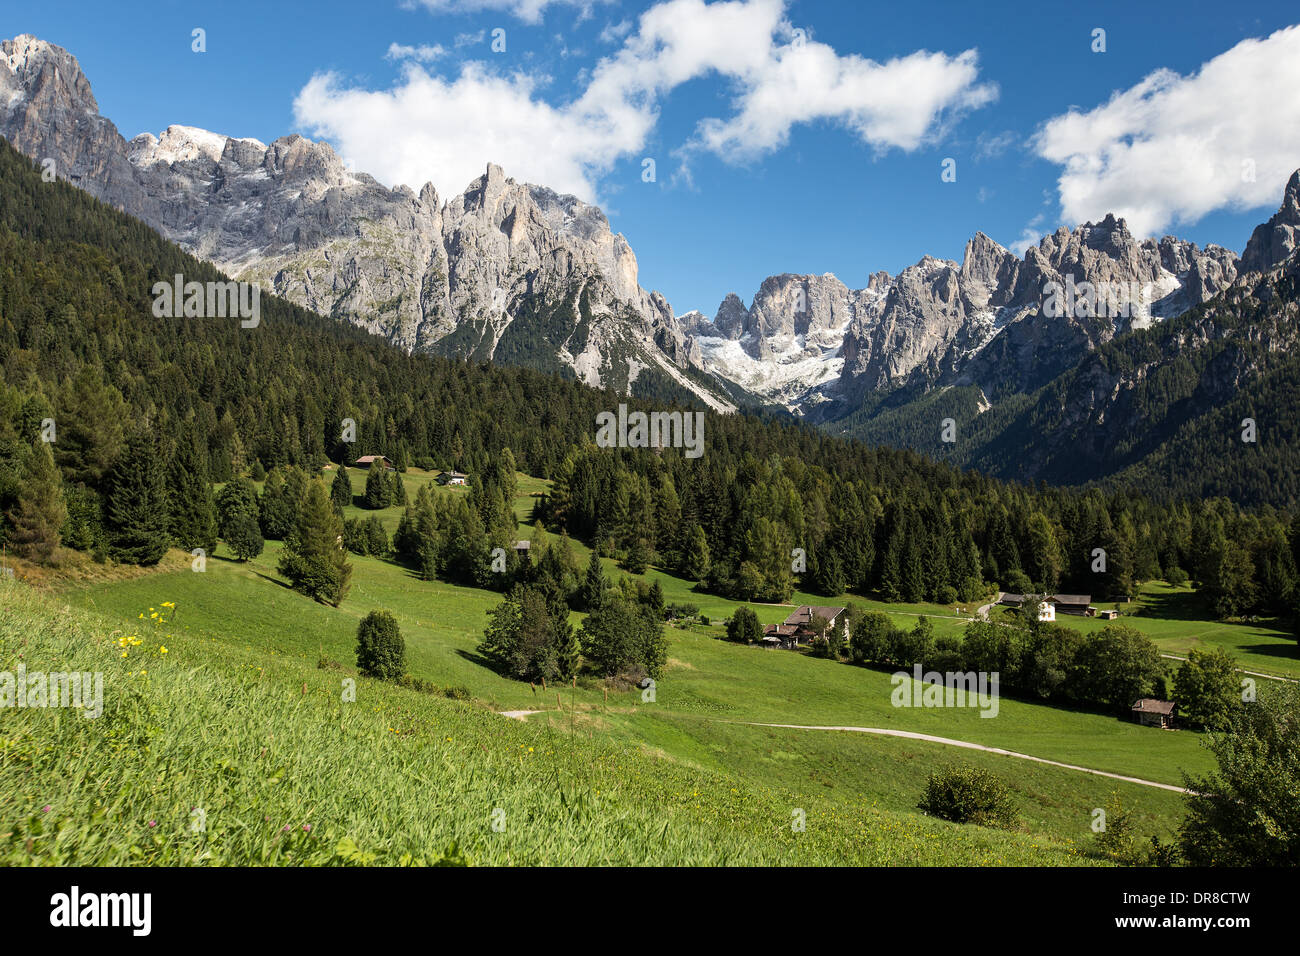 The Val Canali valley, view from Piereni. The Pale di San Martino mountain group. The Dolomites of Trentino. Italian Alps. Stock Photo